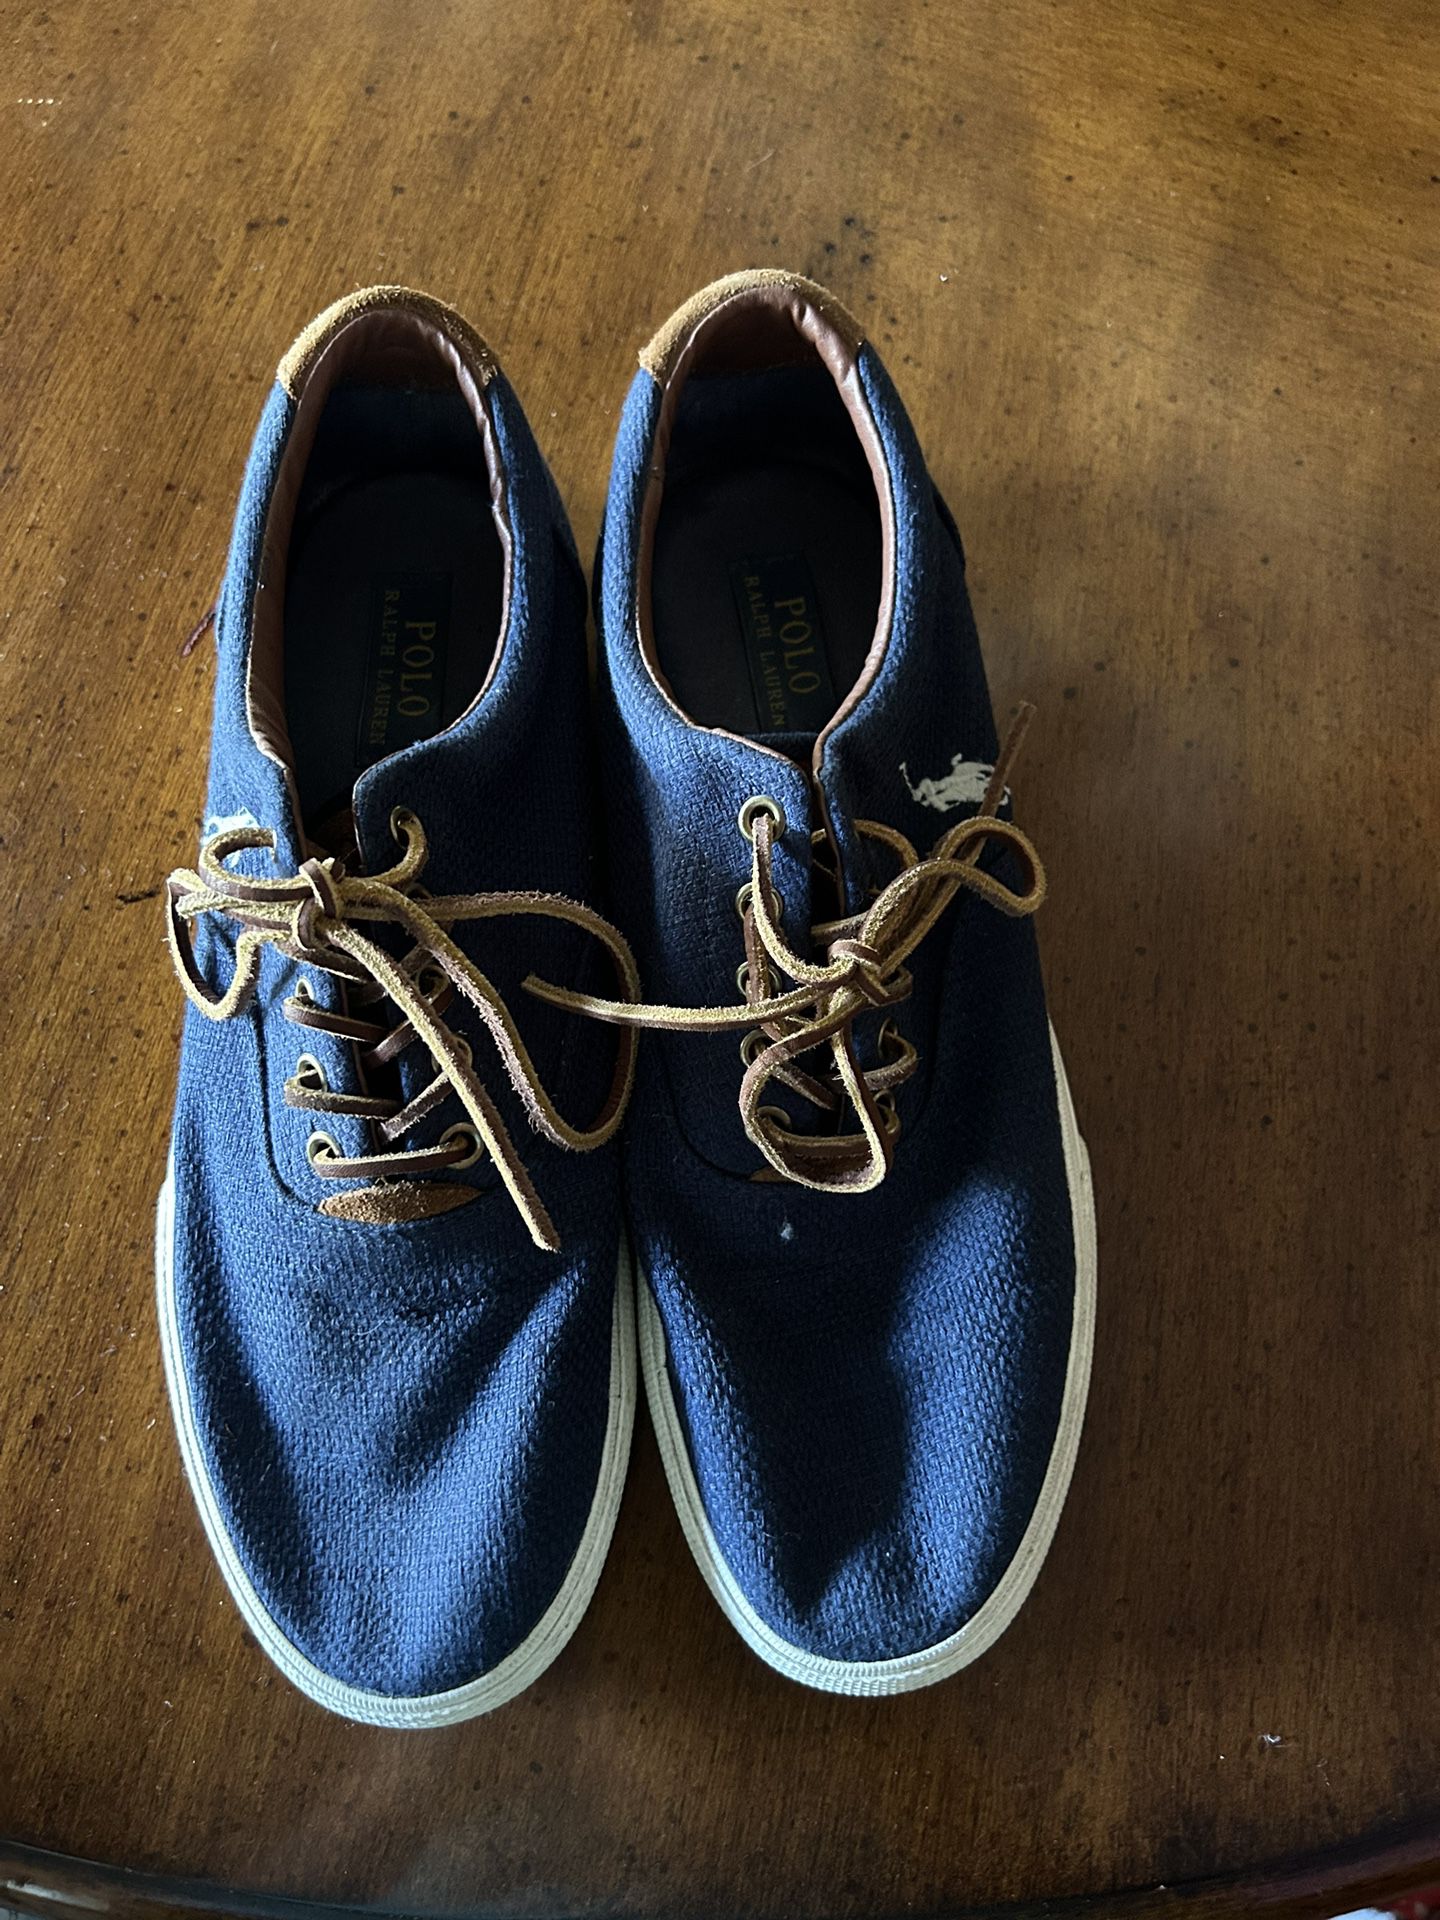 Polo Navy blue Shoes Size 11